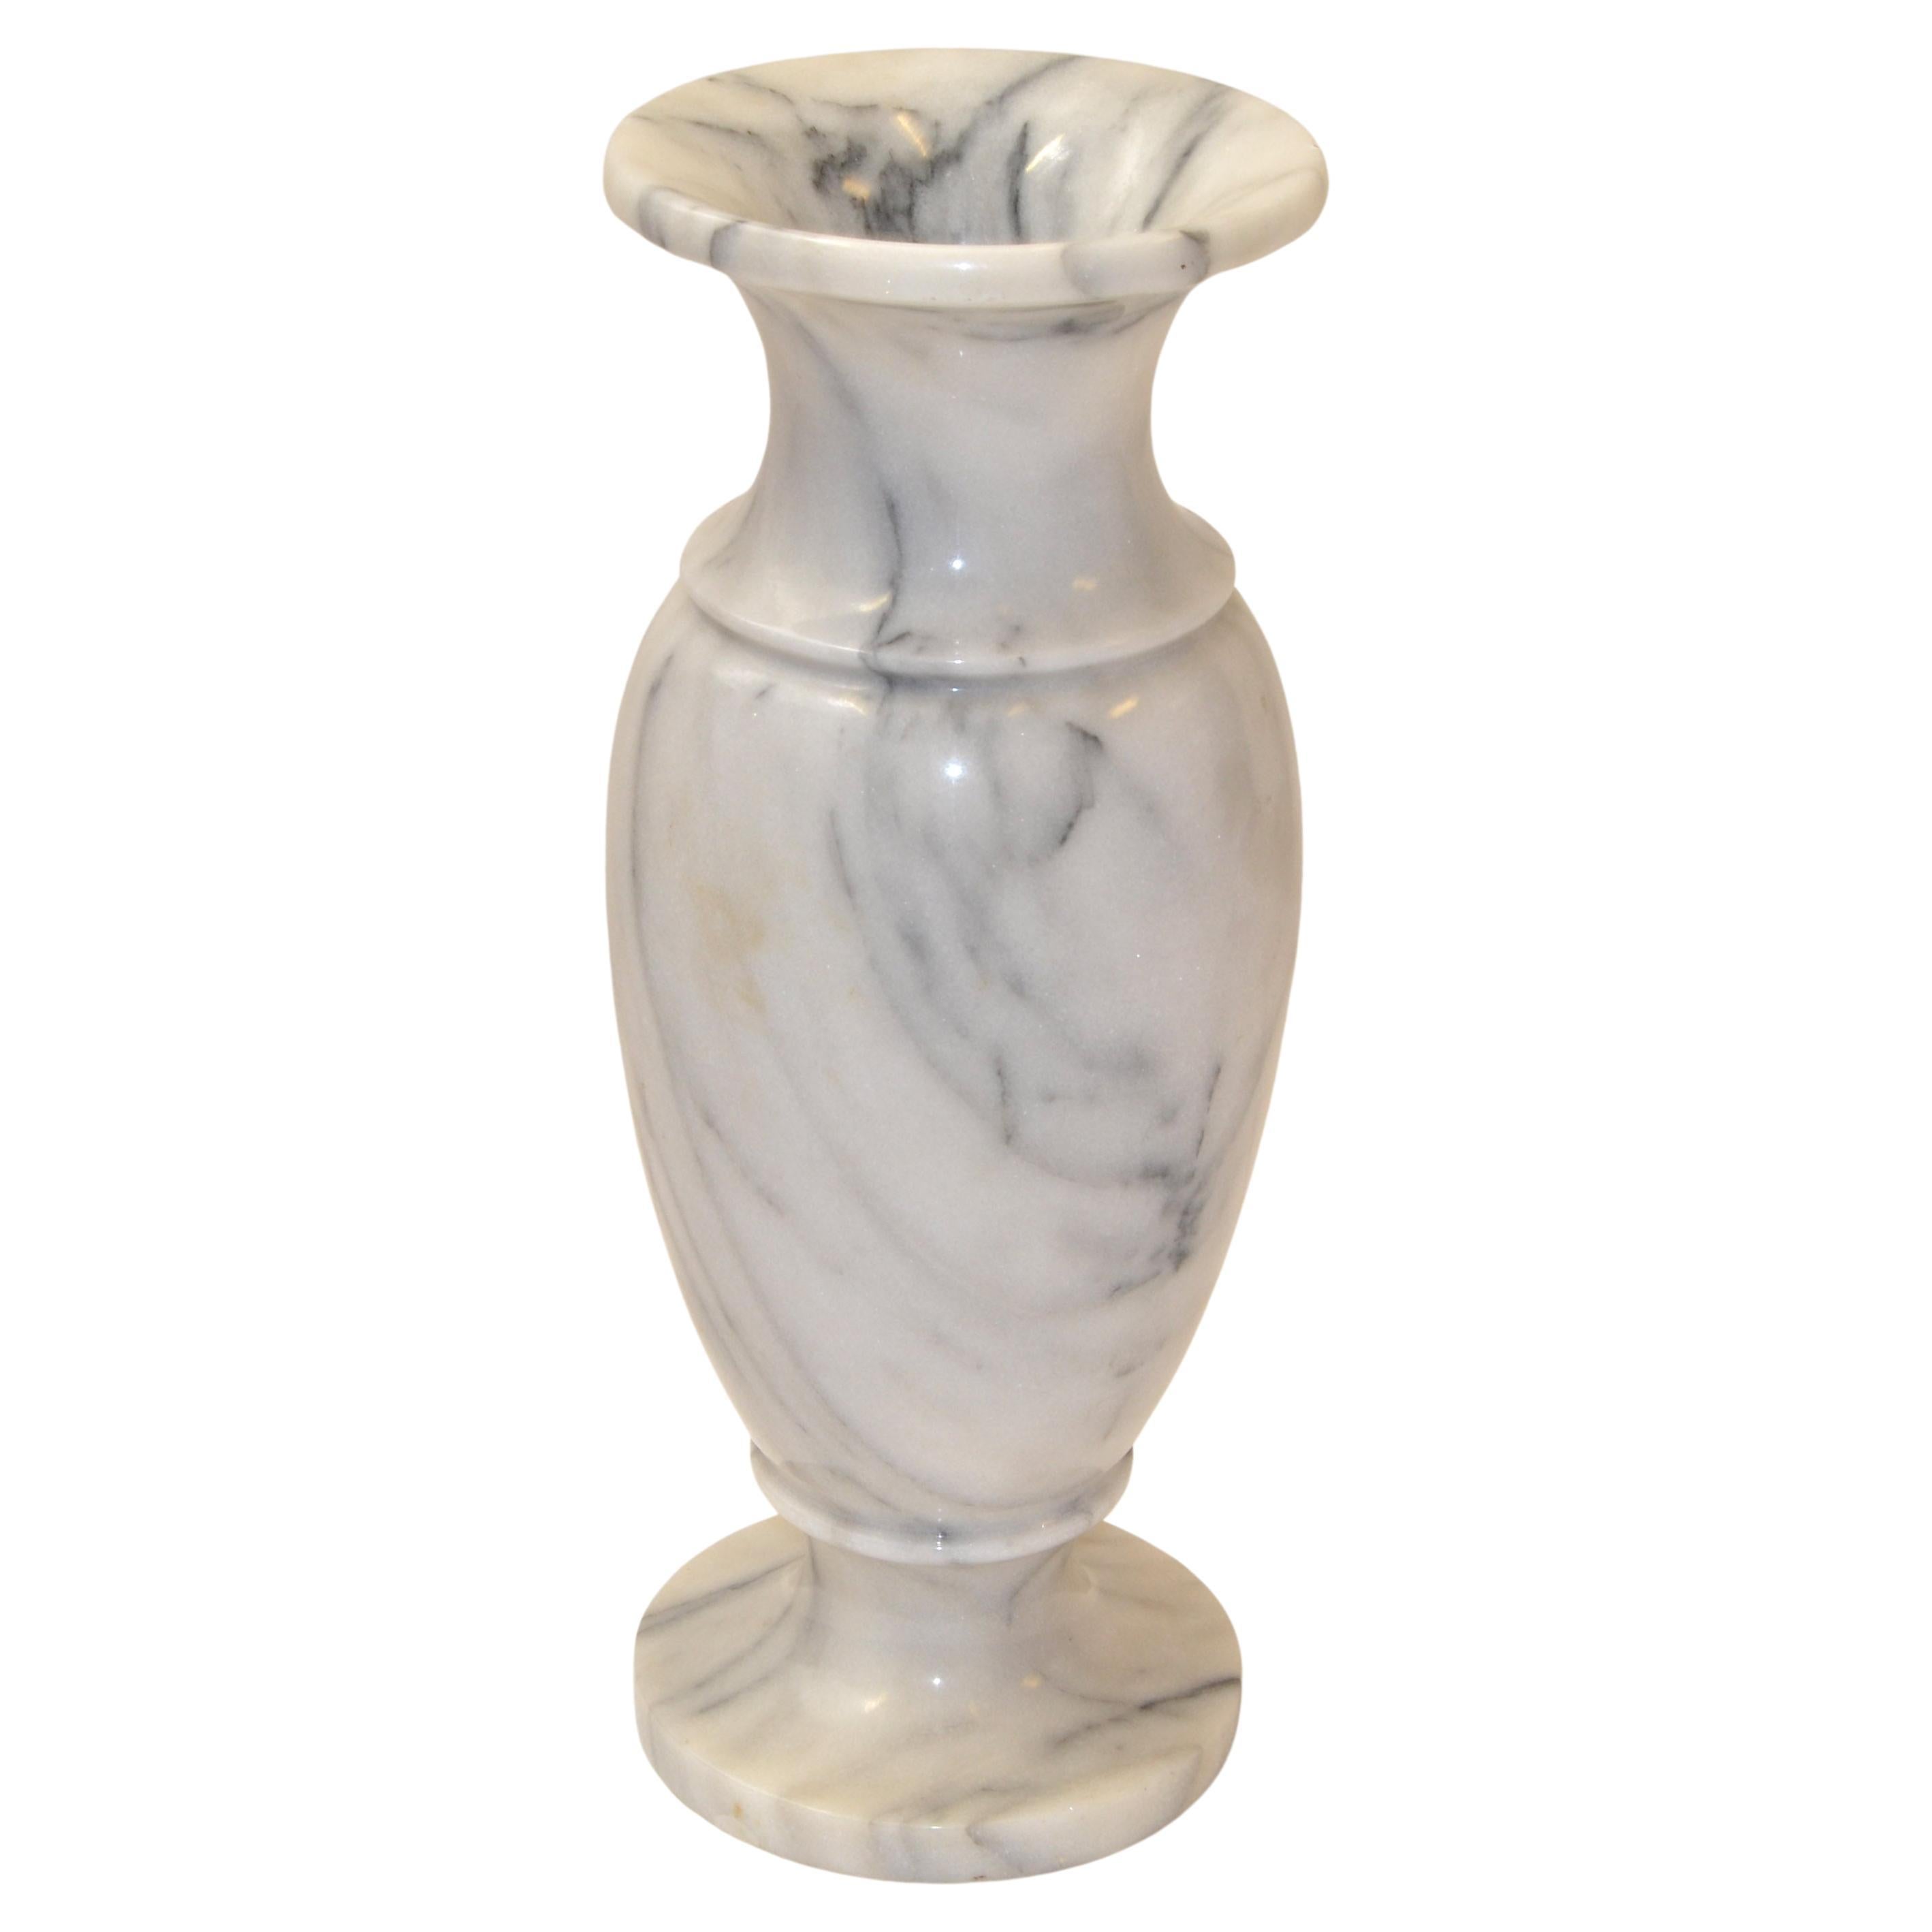 Art Deco Style 20th Century Hand Carved Carrara Marble Vase Urn Vessel, Italy